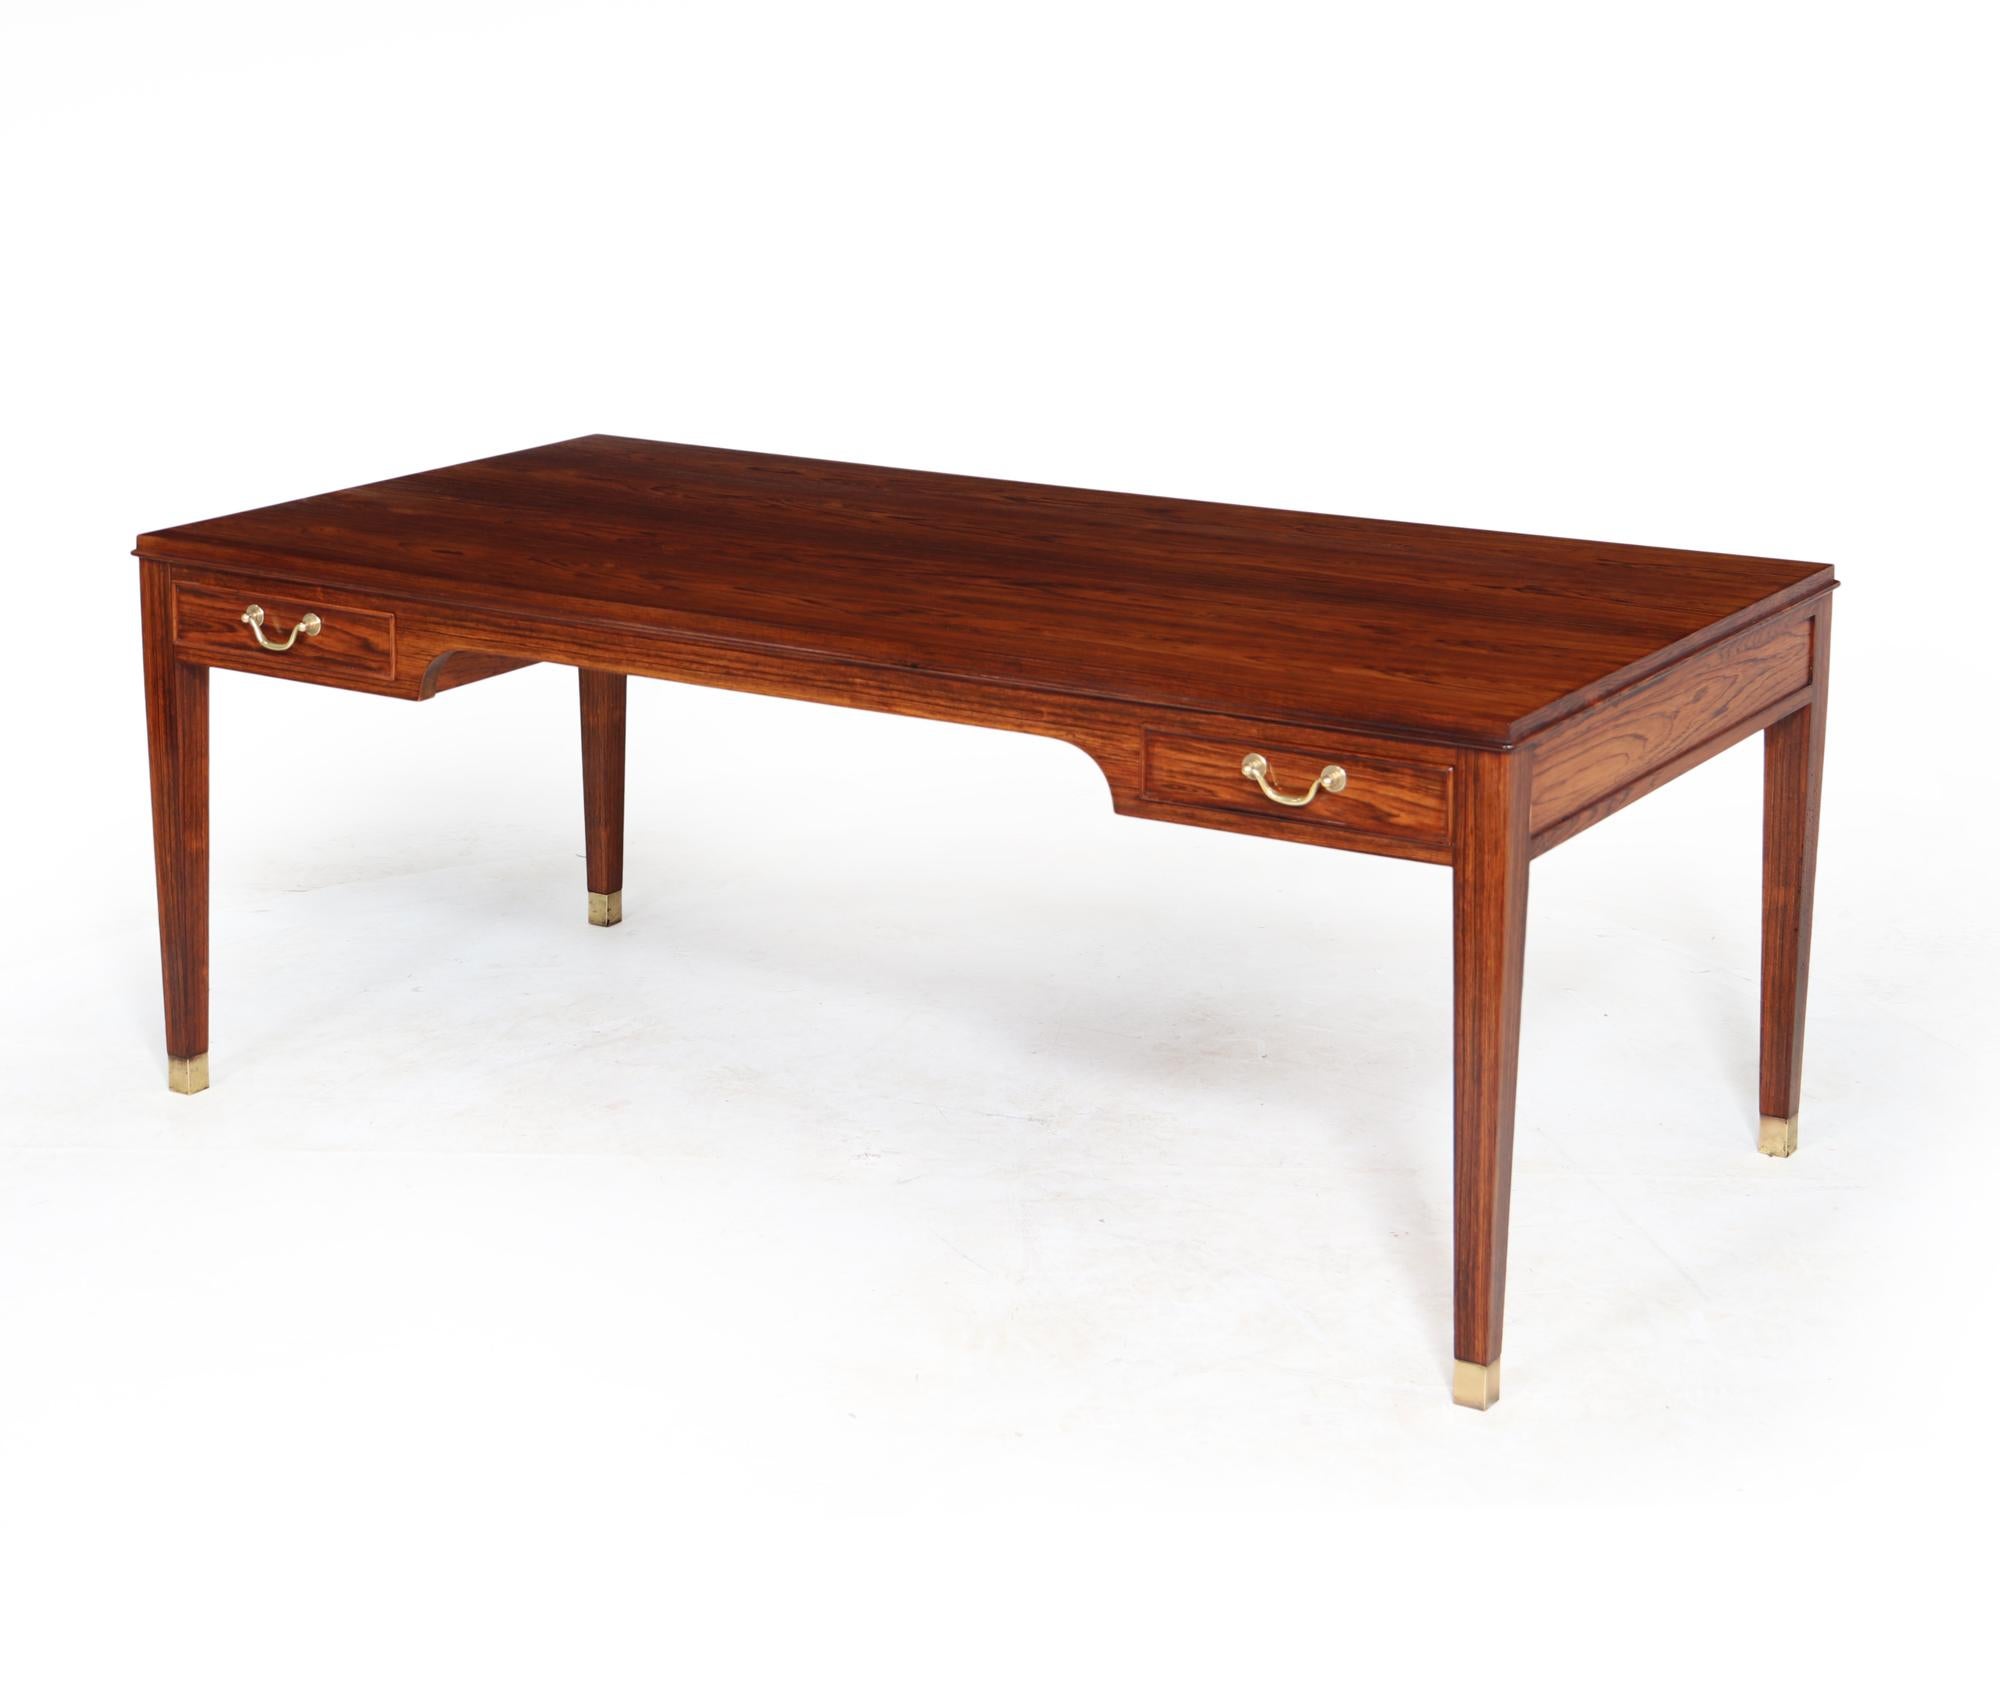 A mid century Rosewood coffee table produced in Denmark in the 1950s and designed by Fritz Henningson the table has four drawers with brass swan neck handles and sabots, the table is super quality and has been carefully restored and hand polished